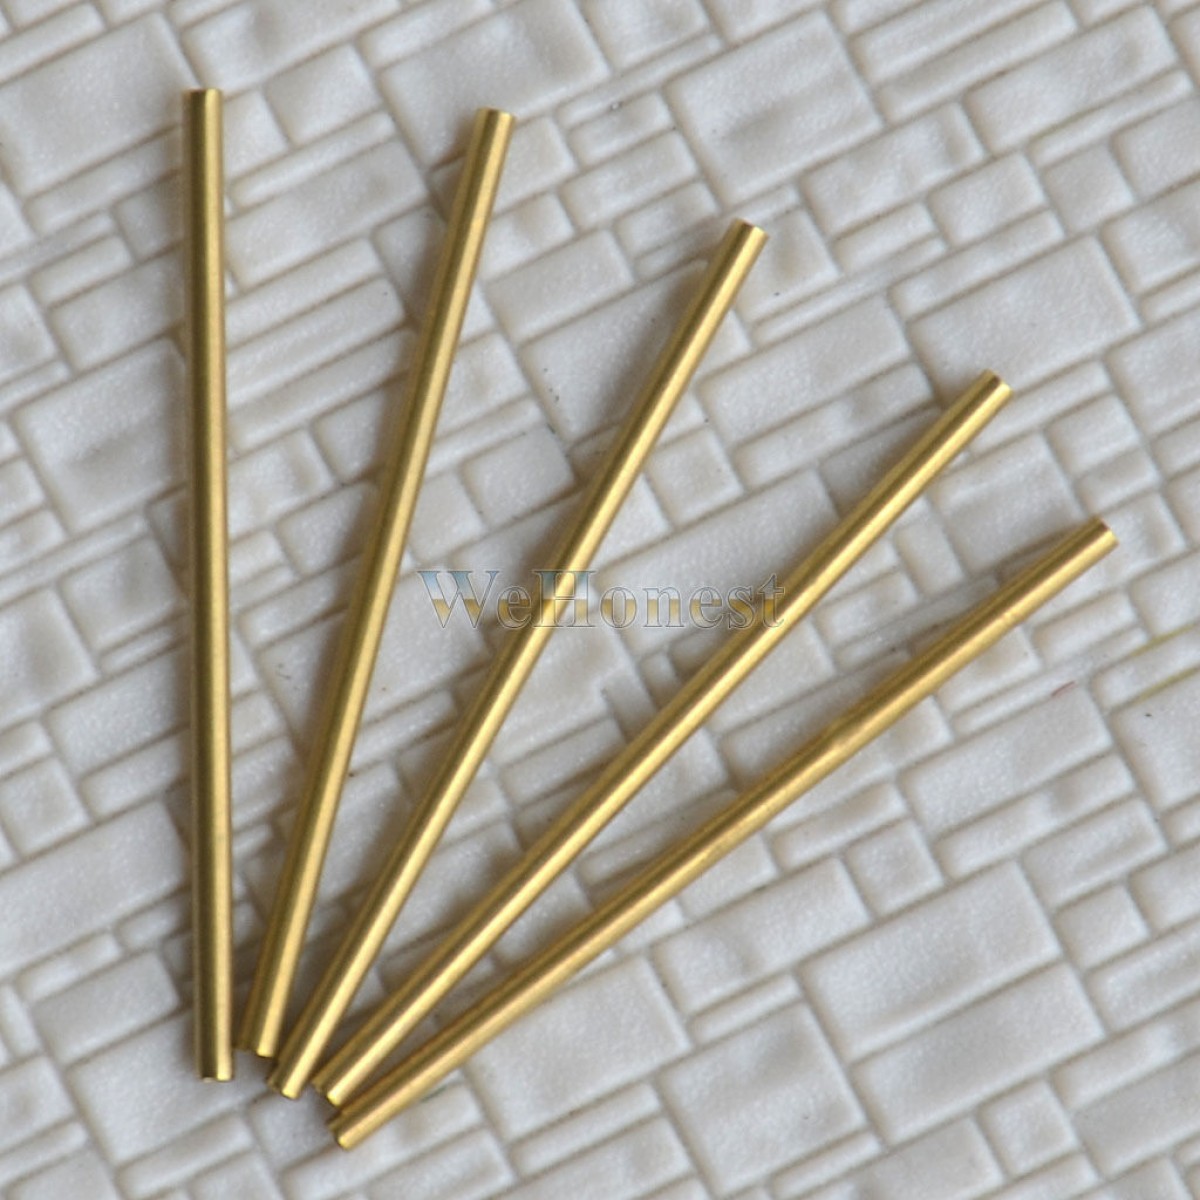  12  x  Brass  Pipe  Copper  Pipe  Copper Tube Φ1.7mm  x  40mm  (WeHonest)